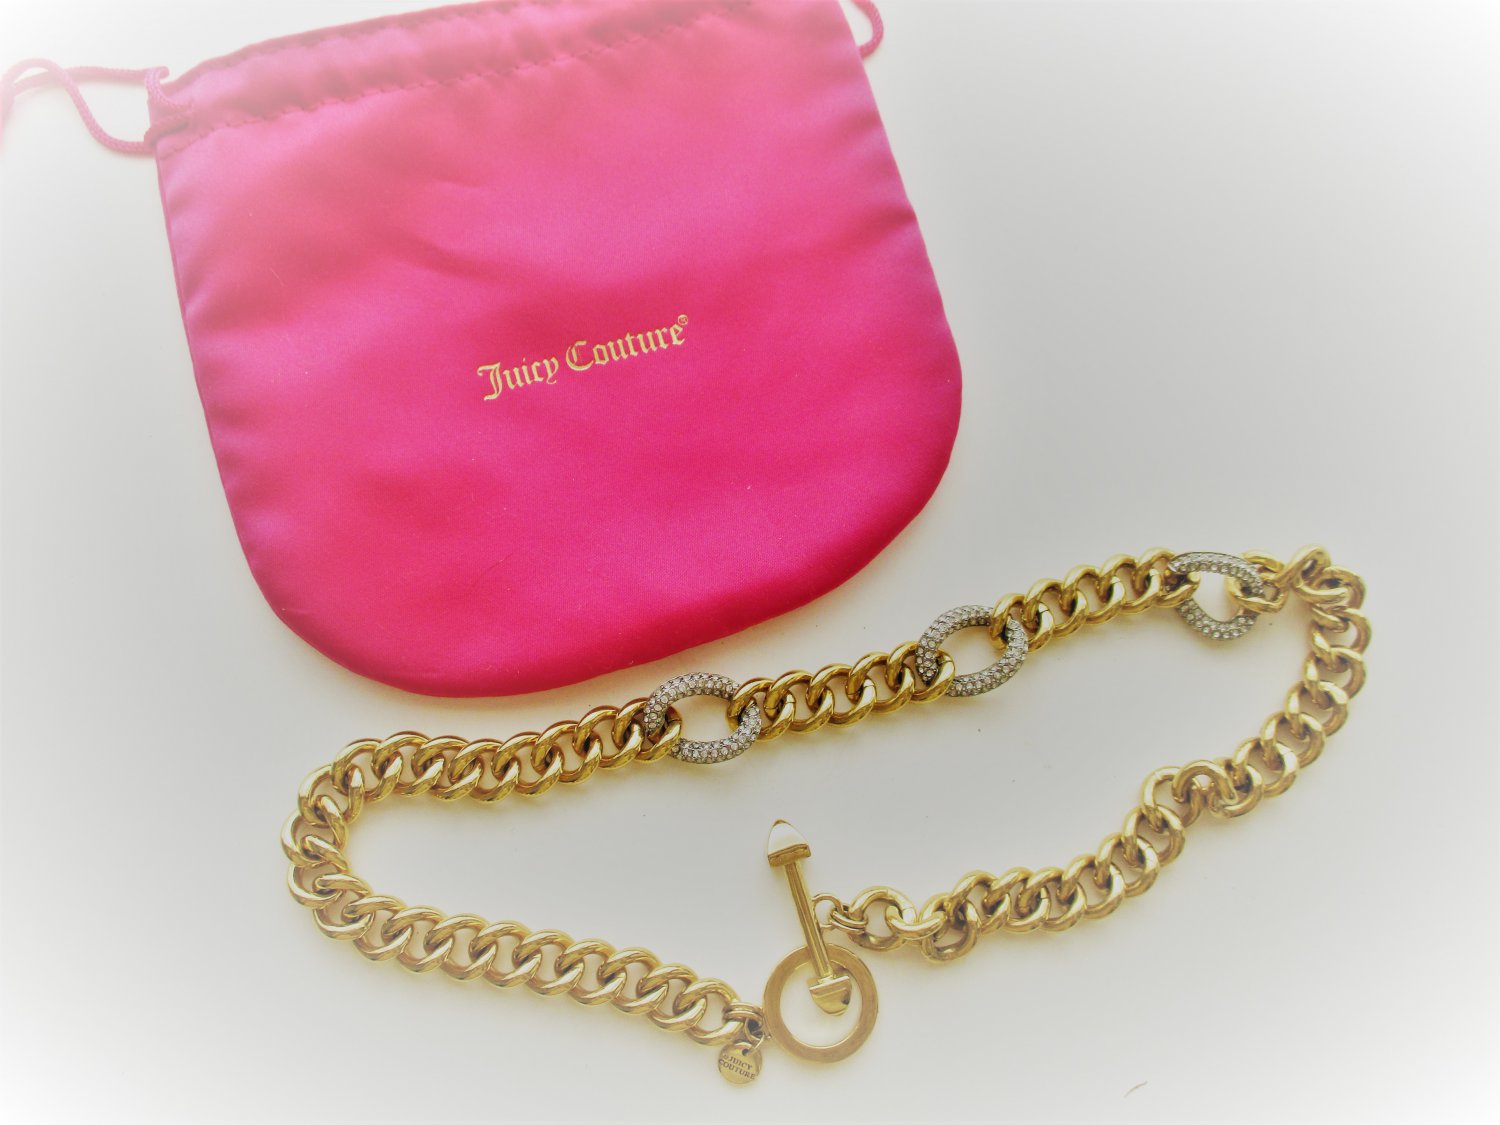 Juicy Couture Pave Rhinestone Gold Tone Chain Link Necklace Pouch